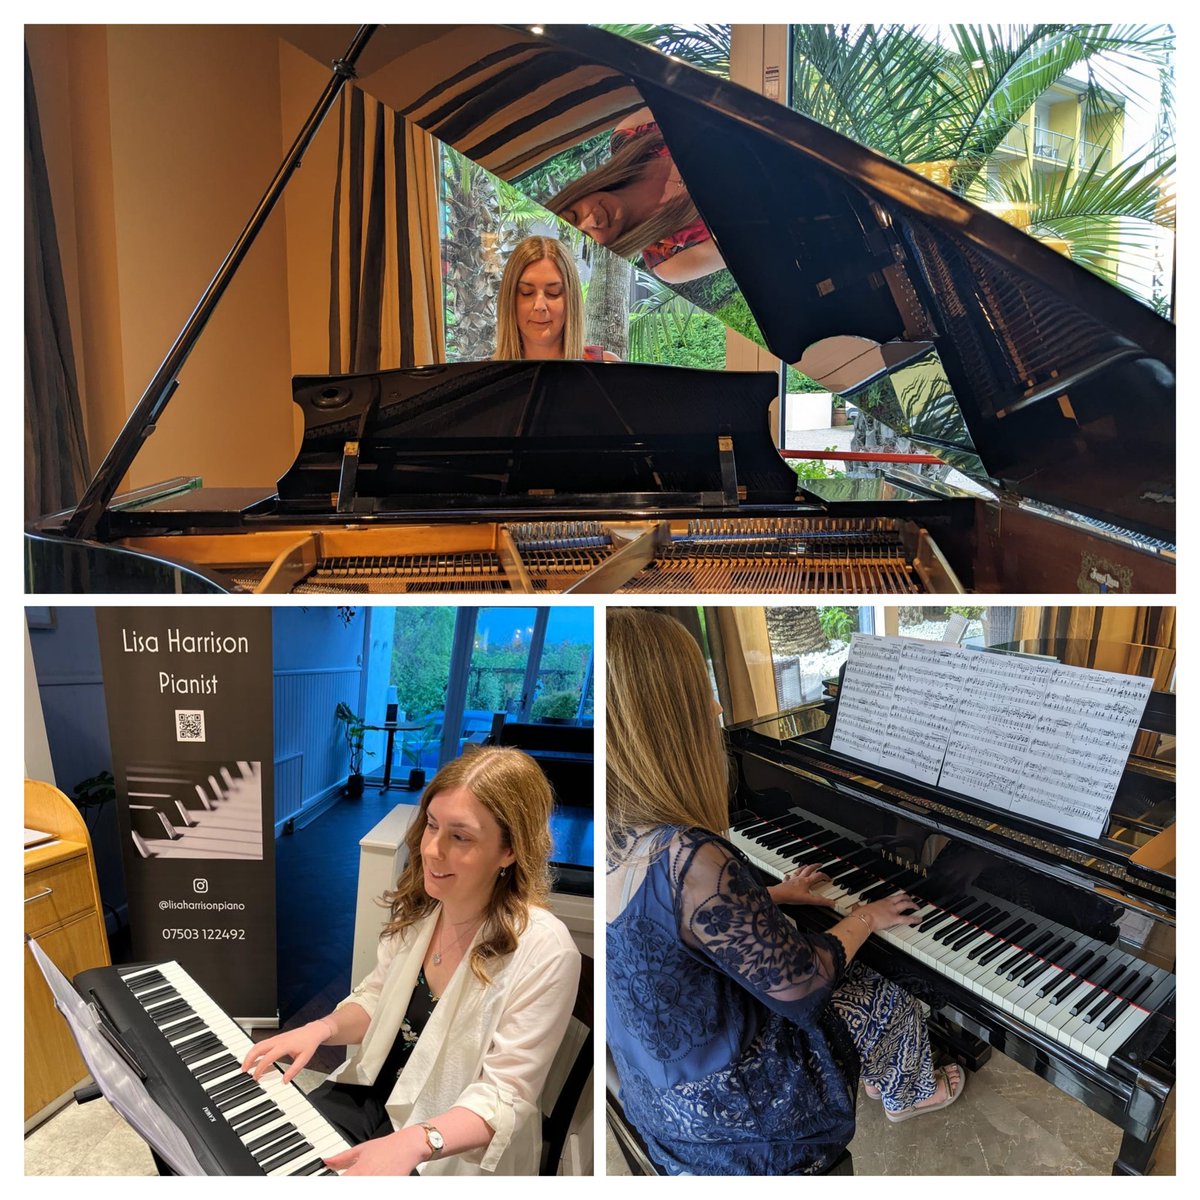 Some of my May highlights - playing in the restaurant at the White House, Rhuallt  at the start of the month and at Hotel Kristal Palace, Lake Garda earlier this week #piano #pianist #pianistnorthwales #pianistinitaly #lakegarda #rivadelgarda🇮🇹 #rivadelgarda❤️